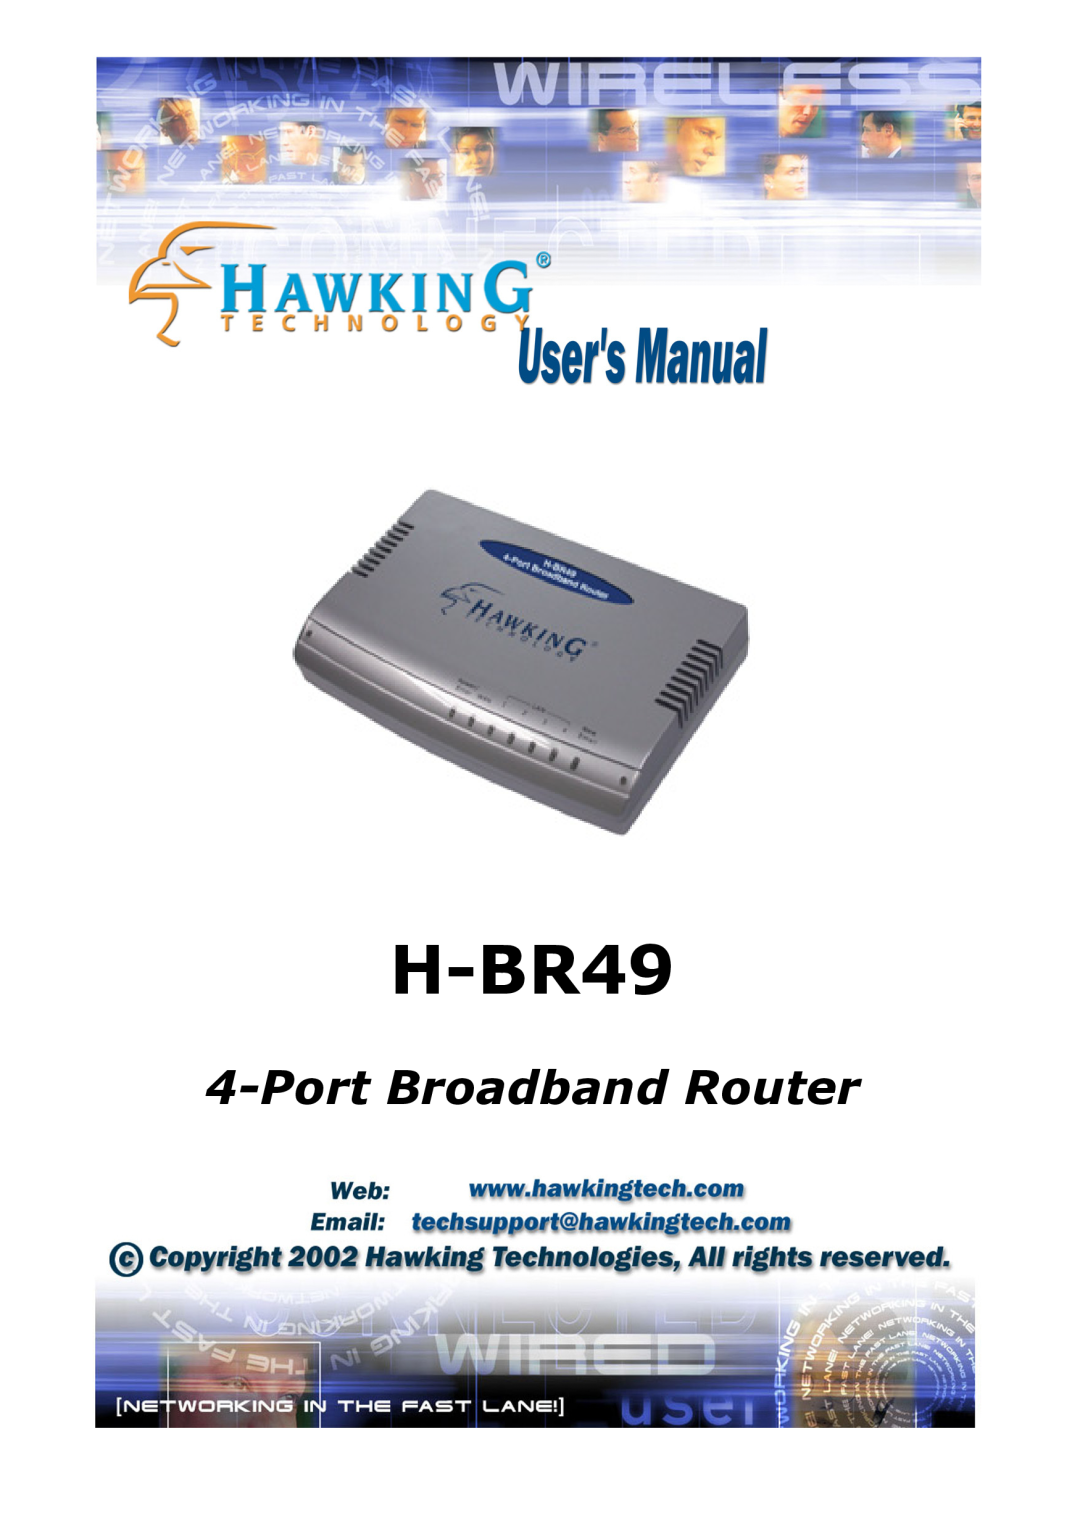 Hawking Technology H-BR49 manual Port Broadband Router 